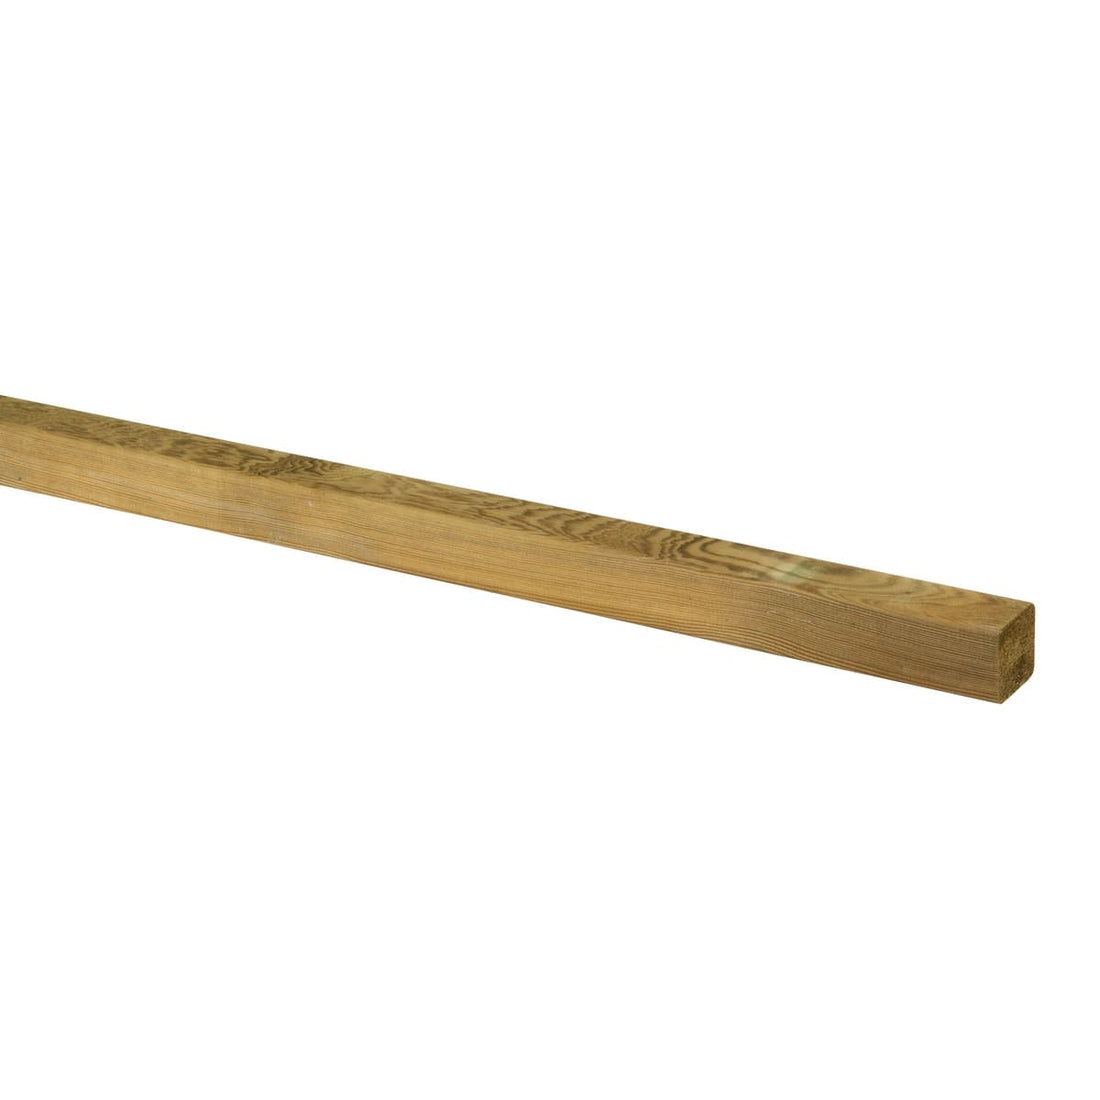 SQUARE POLE 4.5 X 4.5 X H 200 CM MADE OF AUTOCLAVE-TREATED PINE WOOD - best price from Maltashopper.com BR500721743